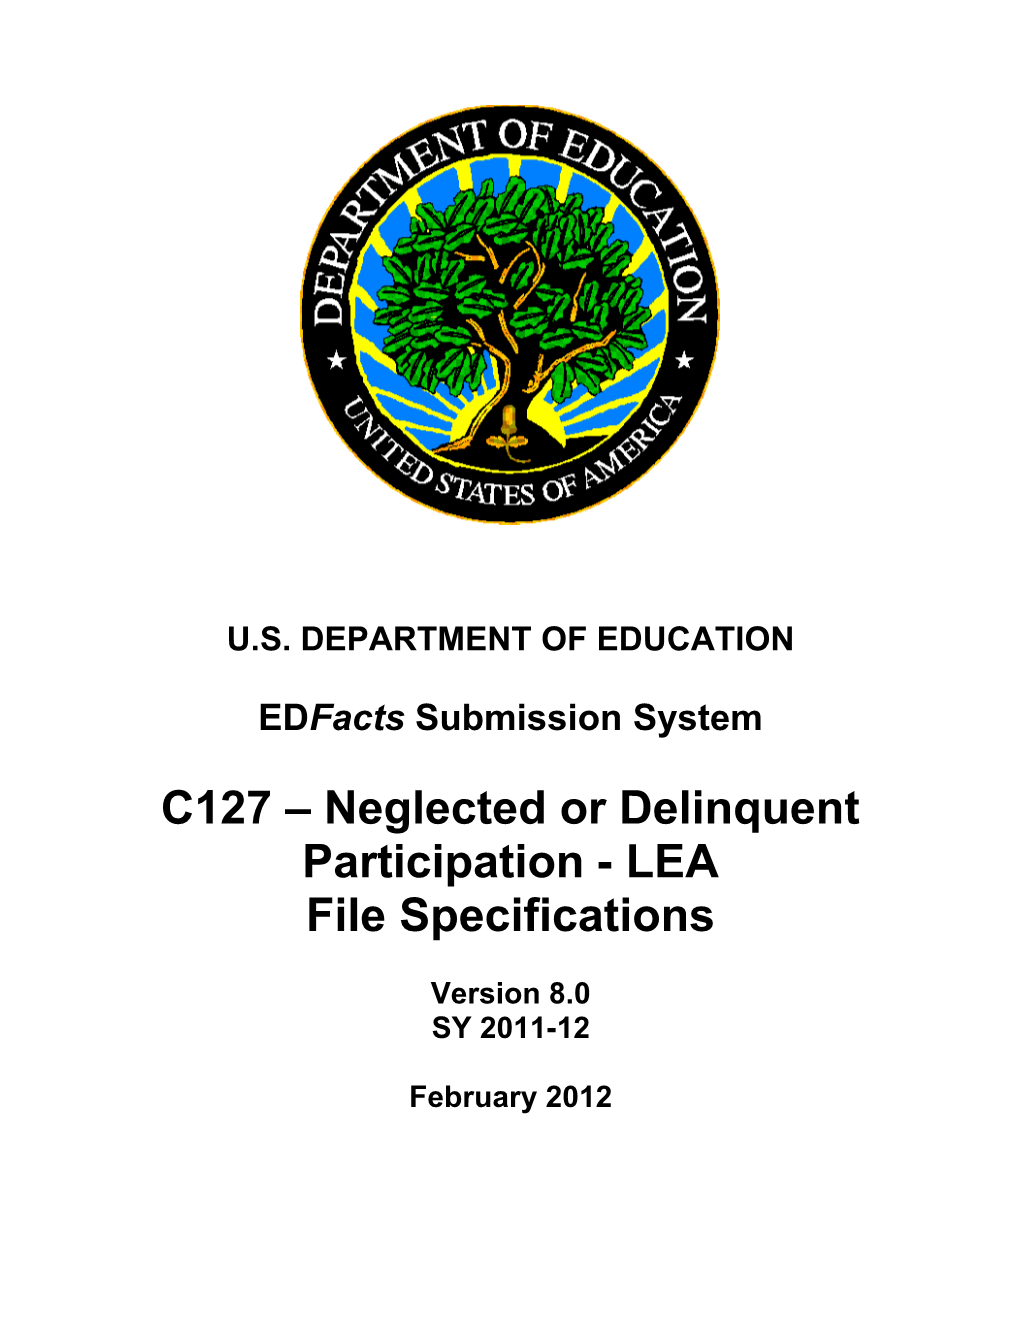 Neglected Or Delinquent Participation - LEA File Specifications